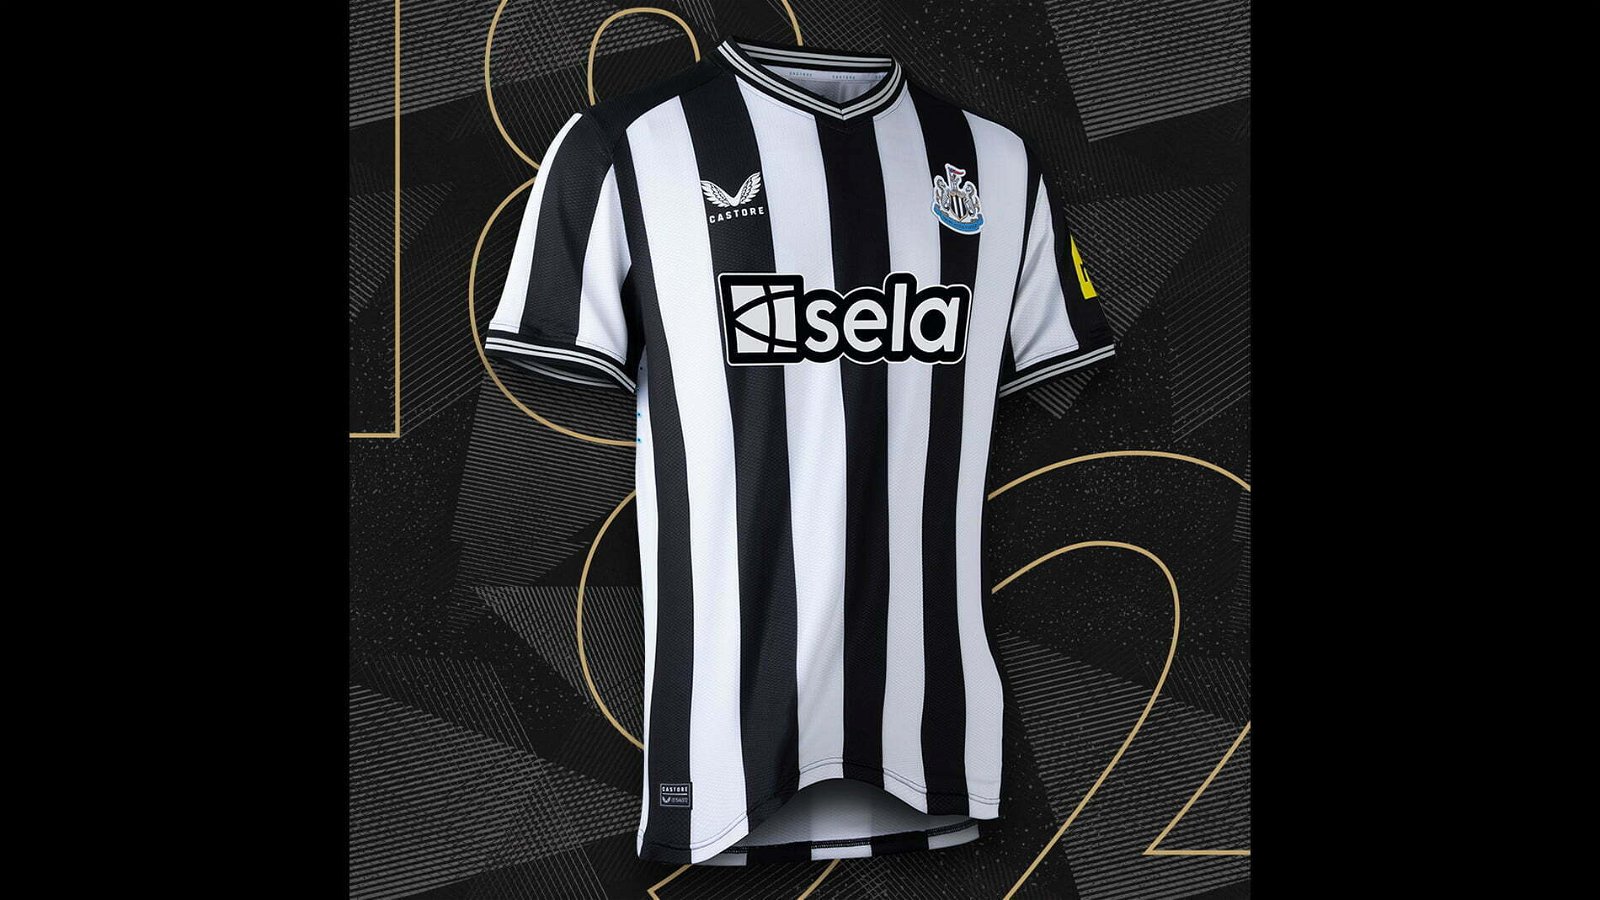 Castore Newcastle United Fourth Shirt 2022 2023 Adults